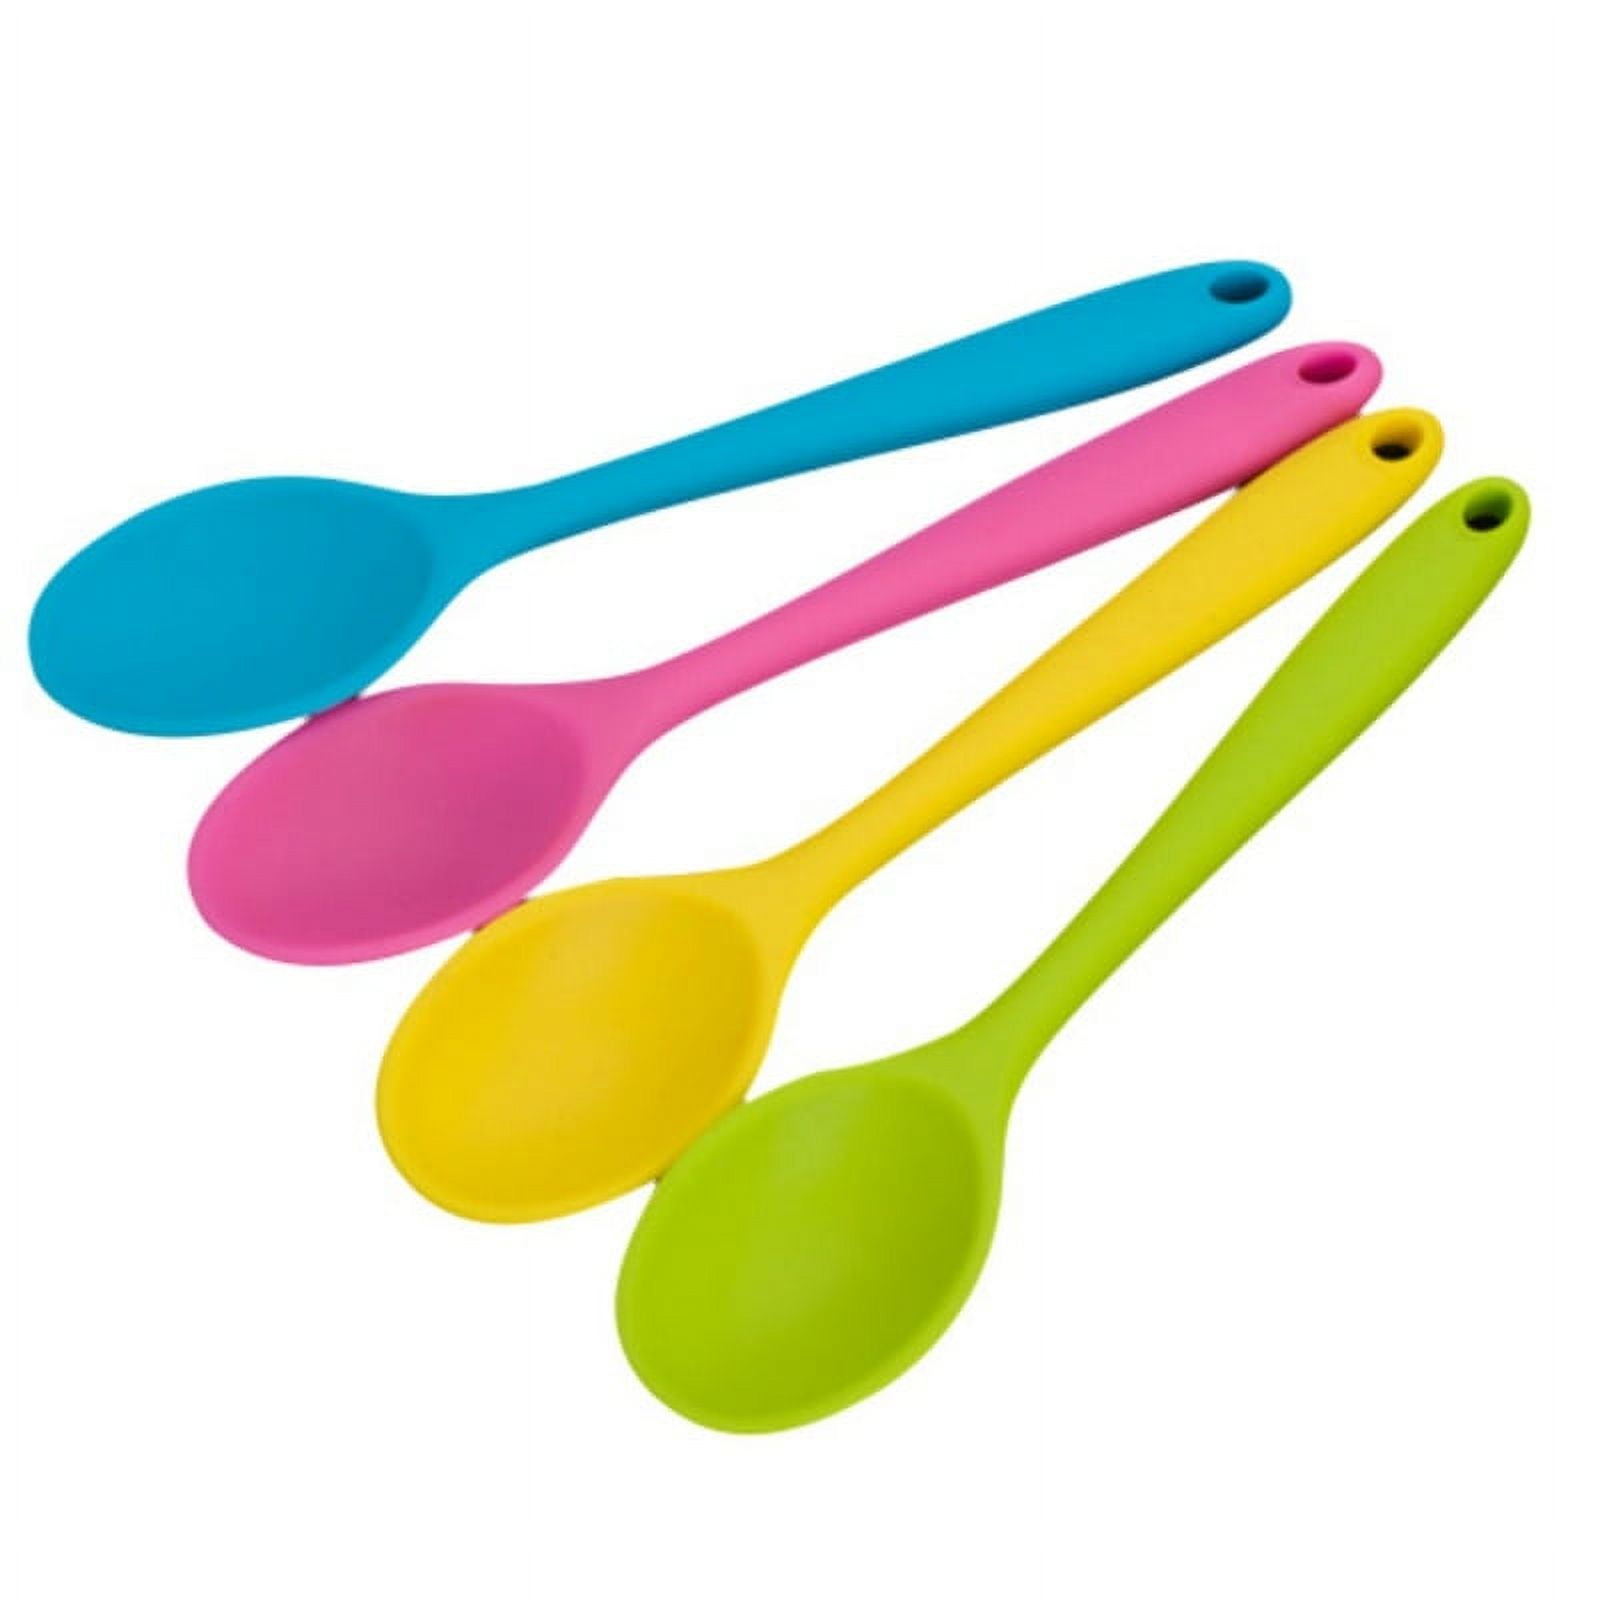 Milkary 8 piece small silicone spoons, multicolored nonstick kitchen spoon  heat resistant silicone serving spoon stirring mixing tool